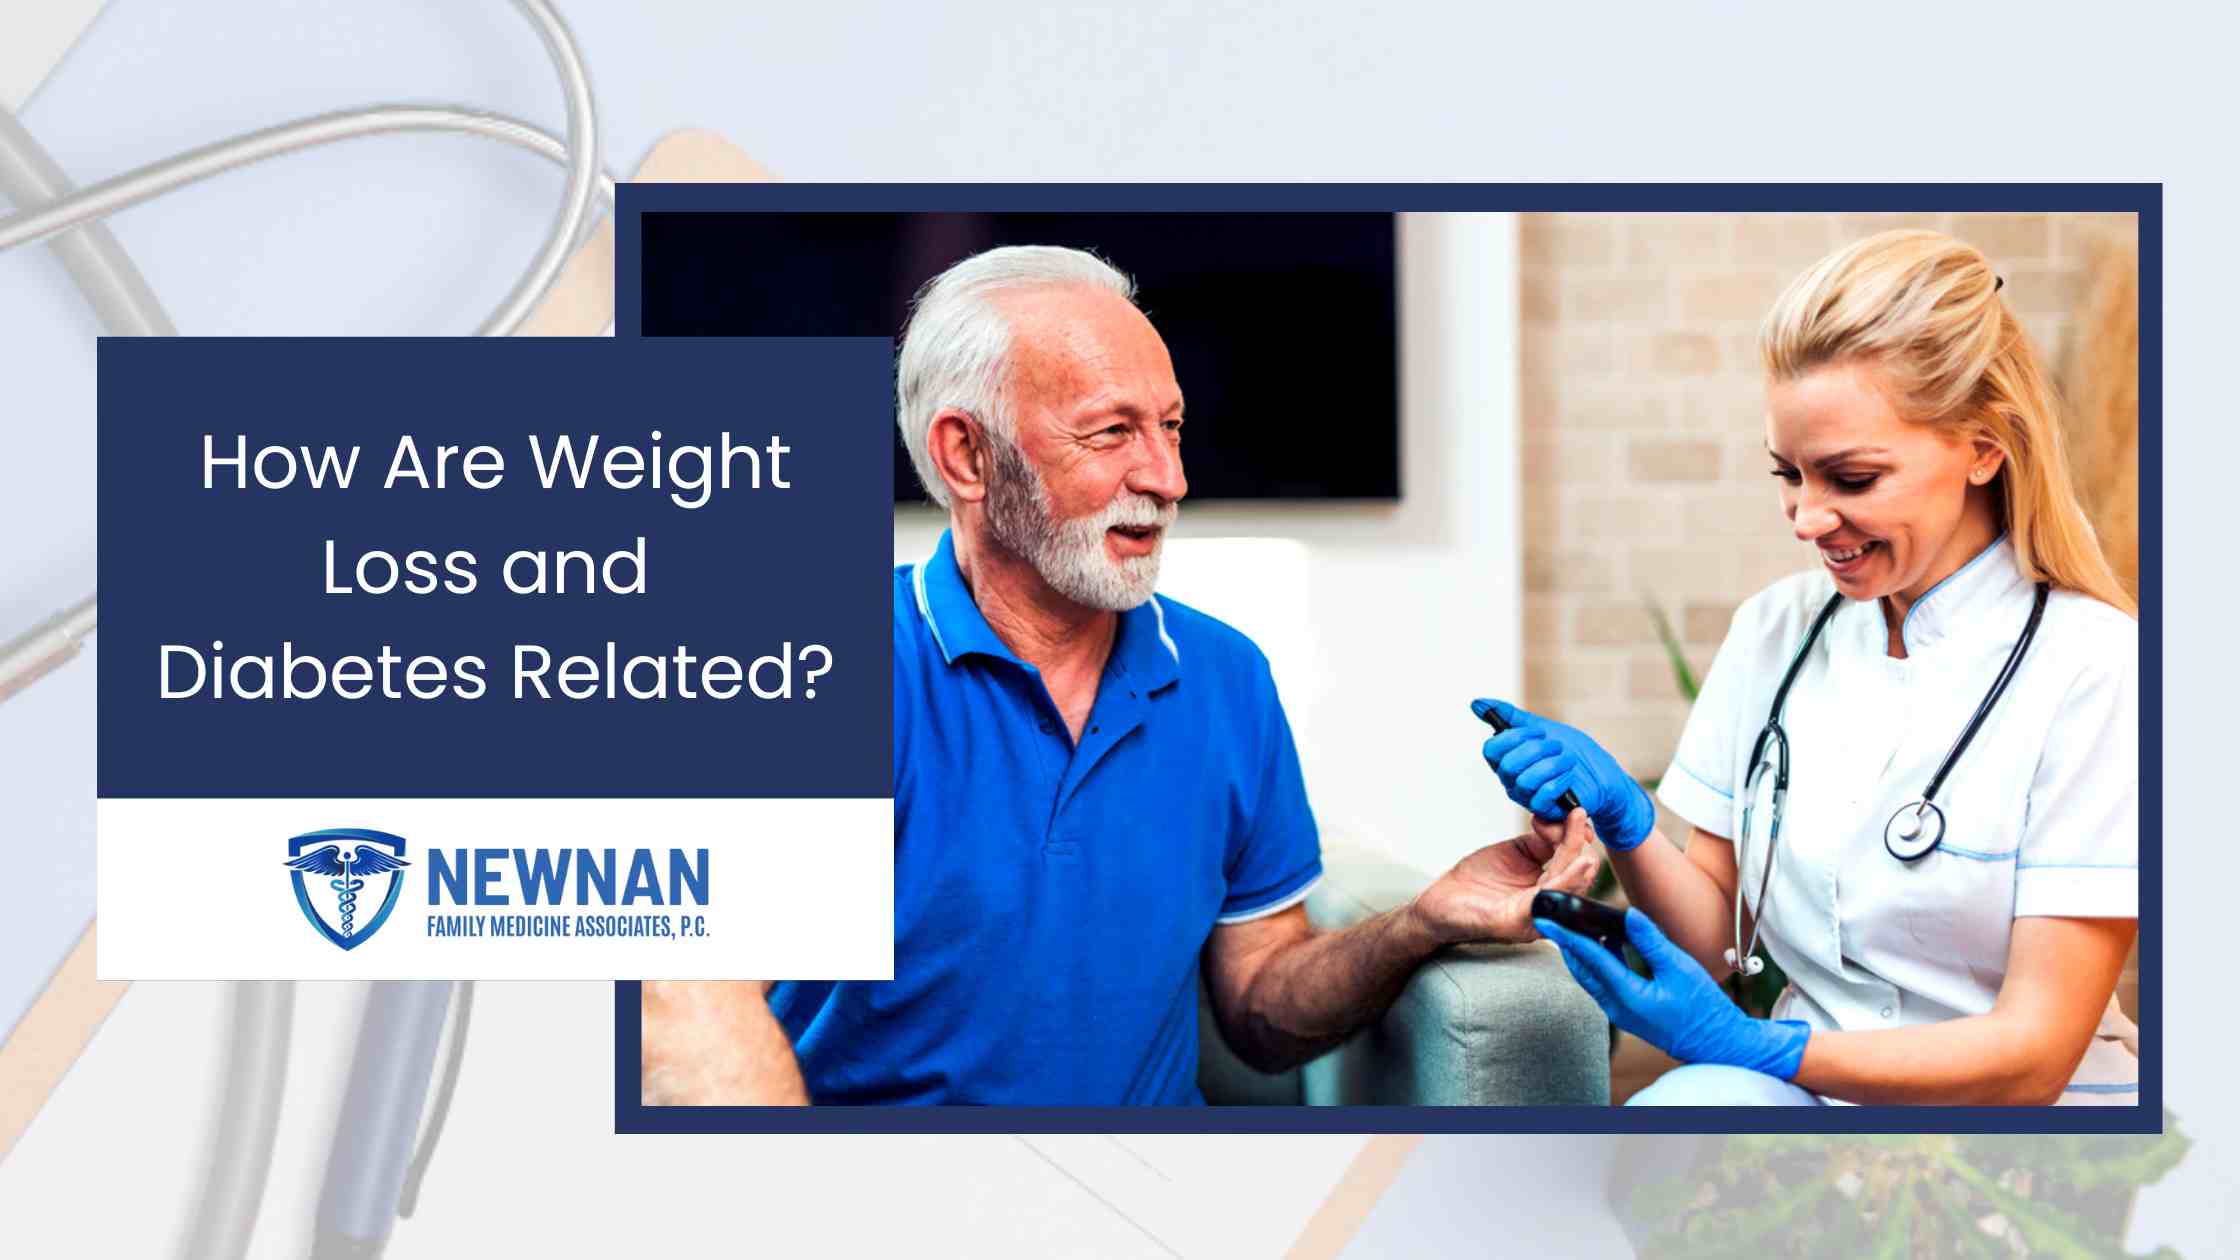 How Are Weight Loss and Diabetes Related?